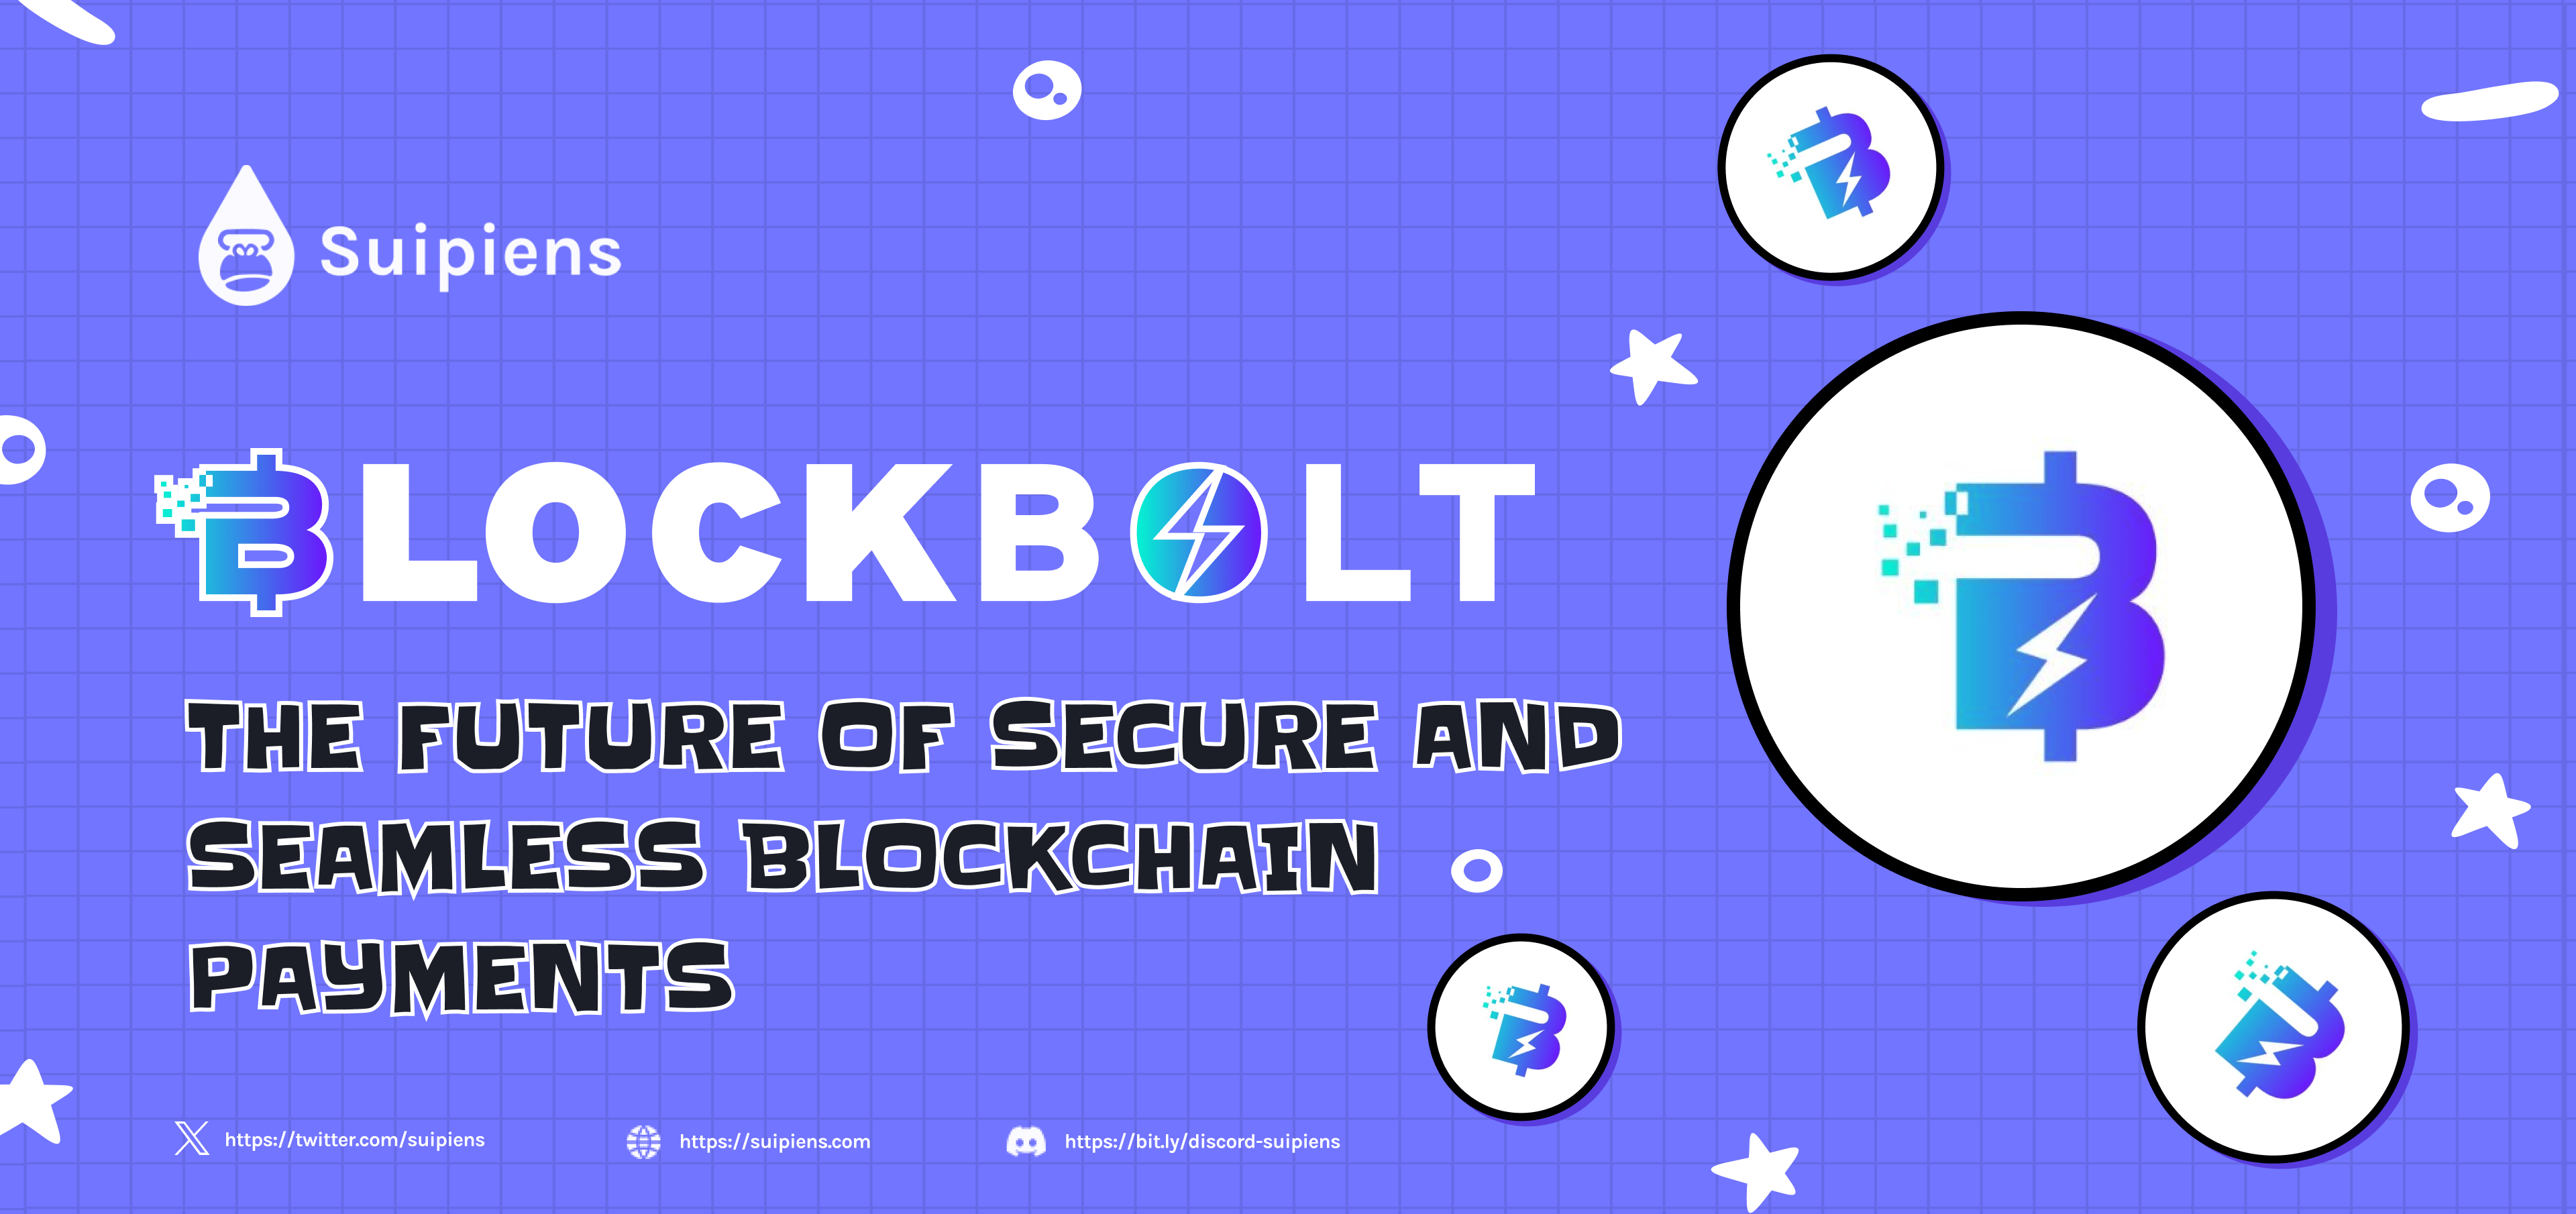 BlockBolt: The Future of Secure and Seamless Blockchain Payments